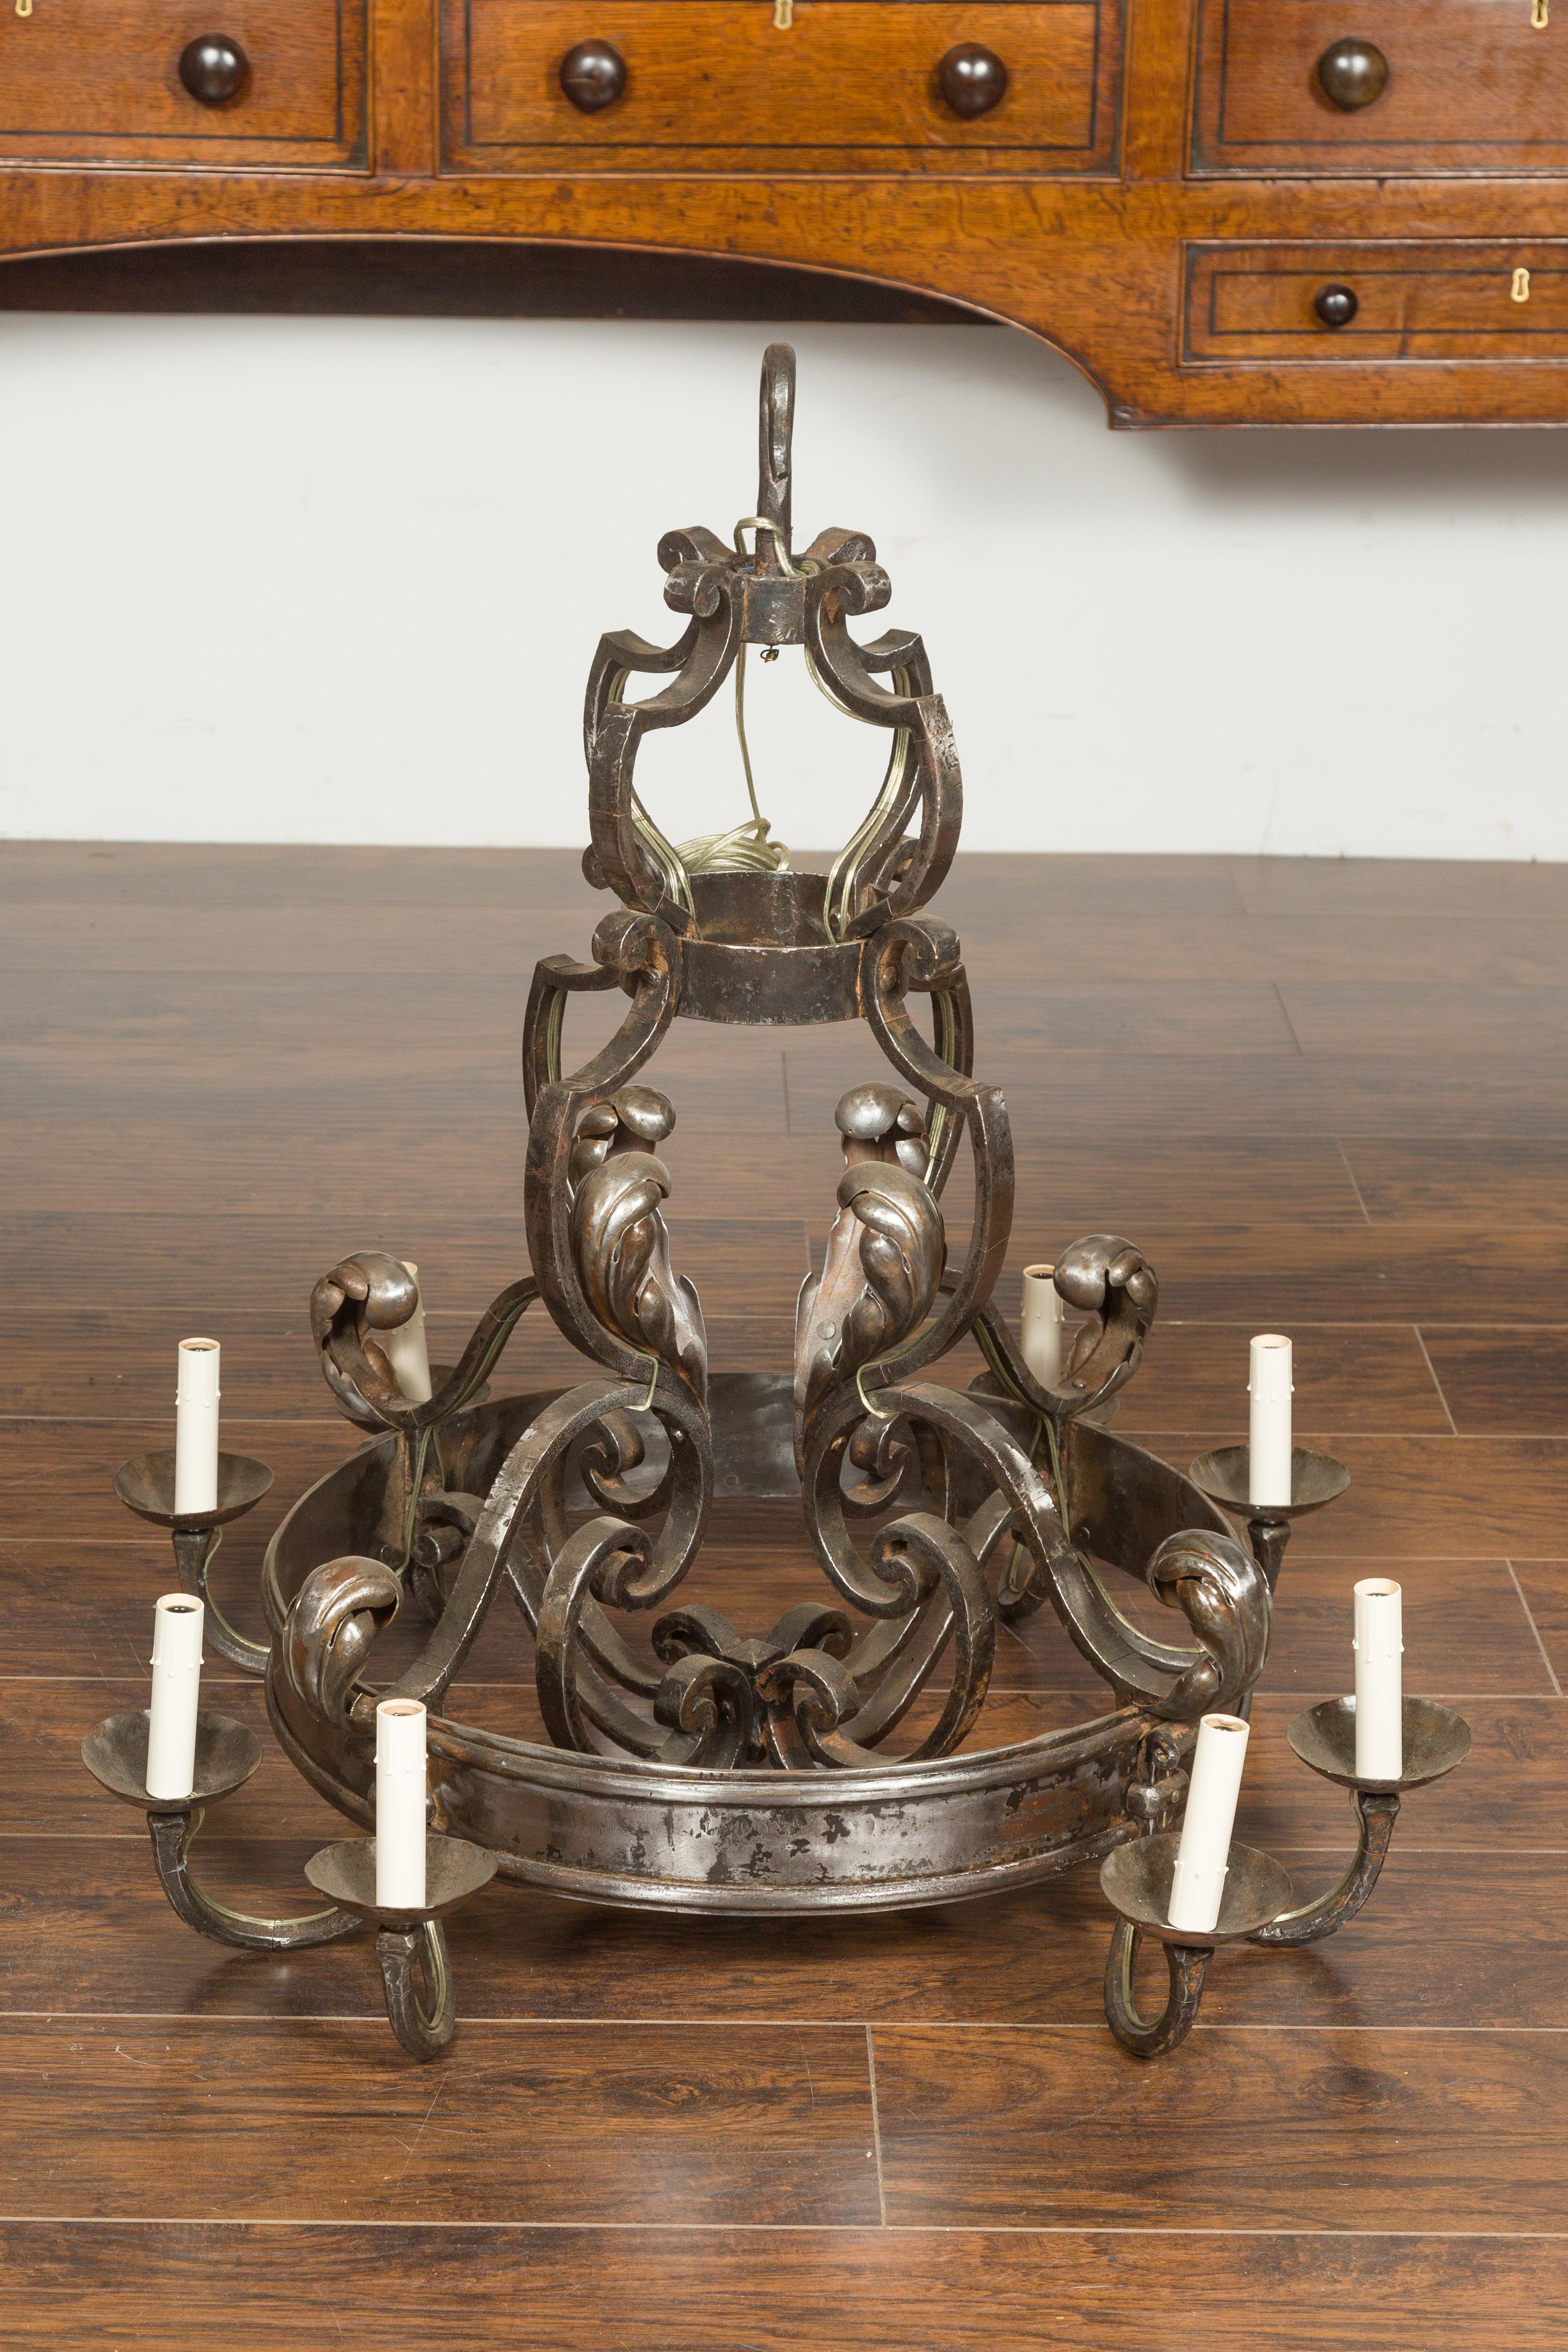 A French vintage polished steel eight-light chandelier from the mid-20th century, with acanthus leaves, rings and scrolling arms. Crafted in France during the midcentury period, this polished steel chandelier features an harmonious arrangement of